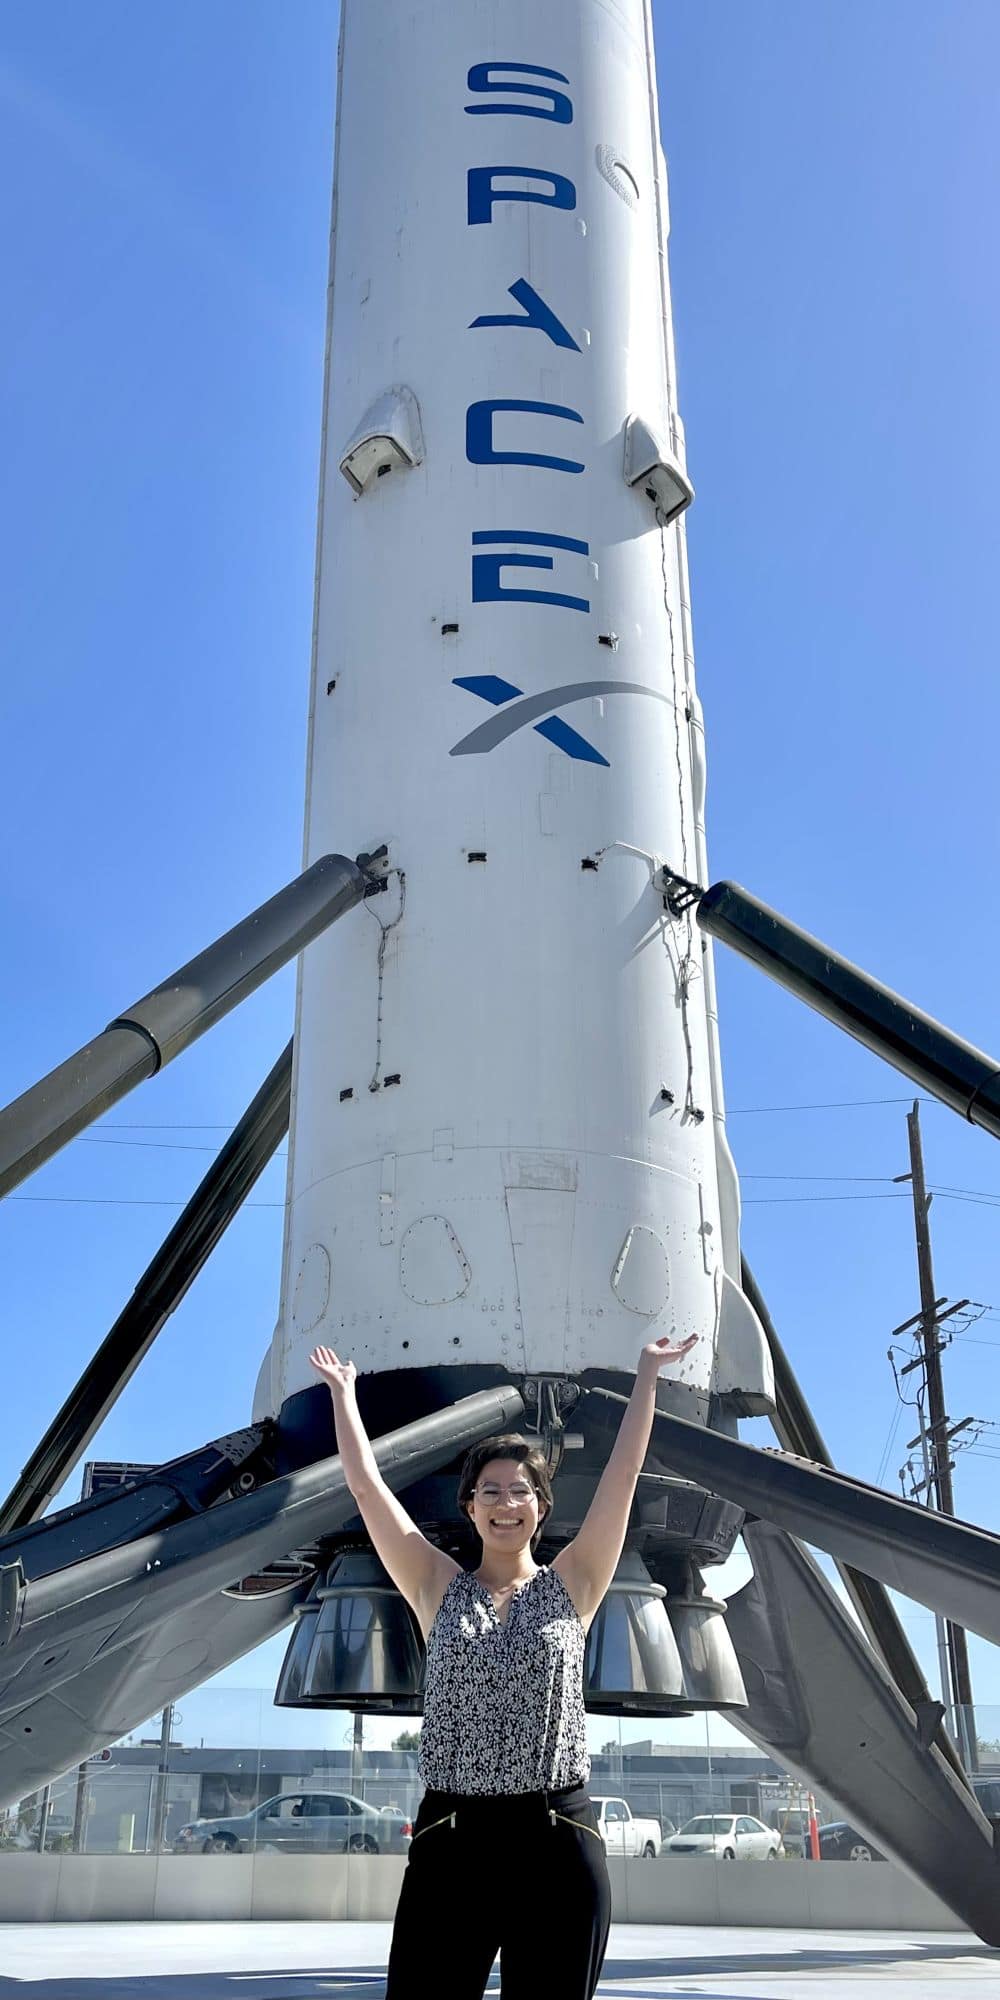 Poteet in front of the Falcon 9 booster after completing an inspection at SpaceX Headquarters. (Photo: JaciLynn Poteet)